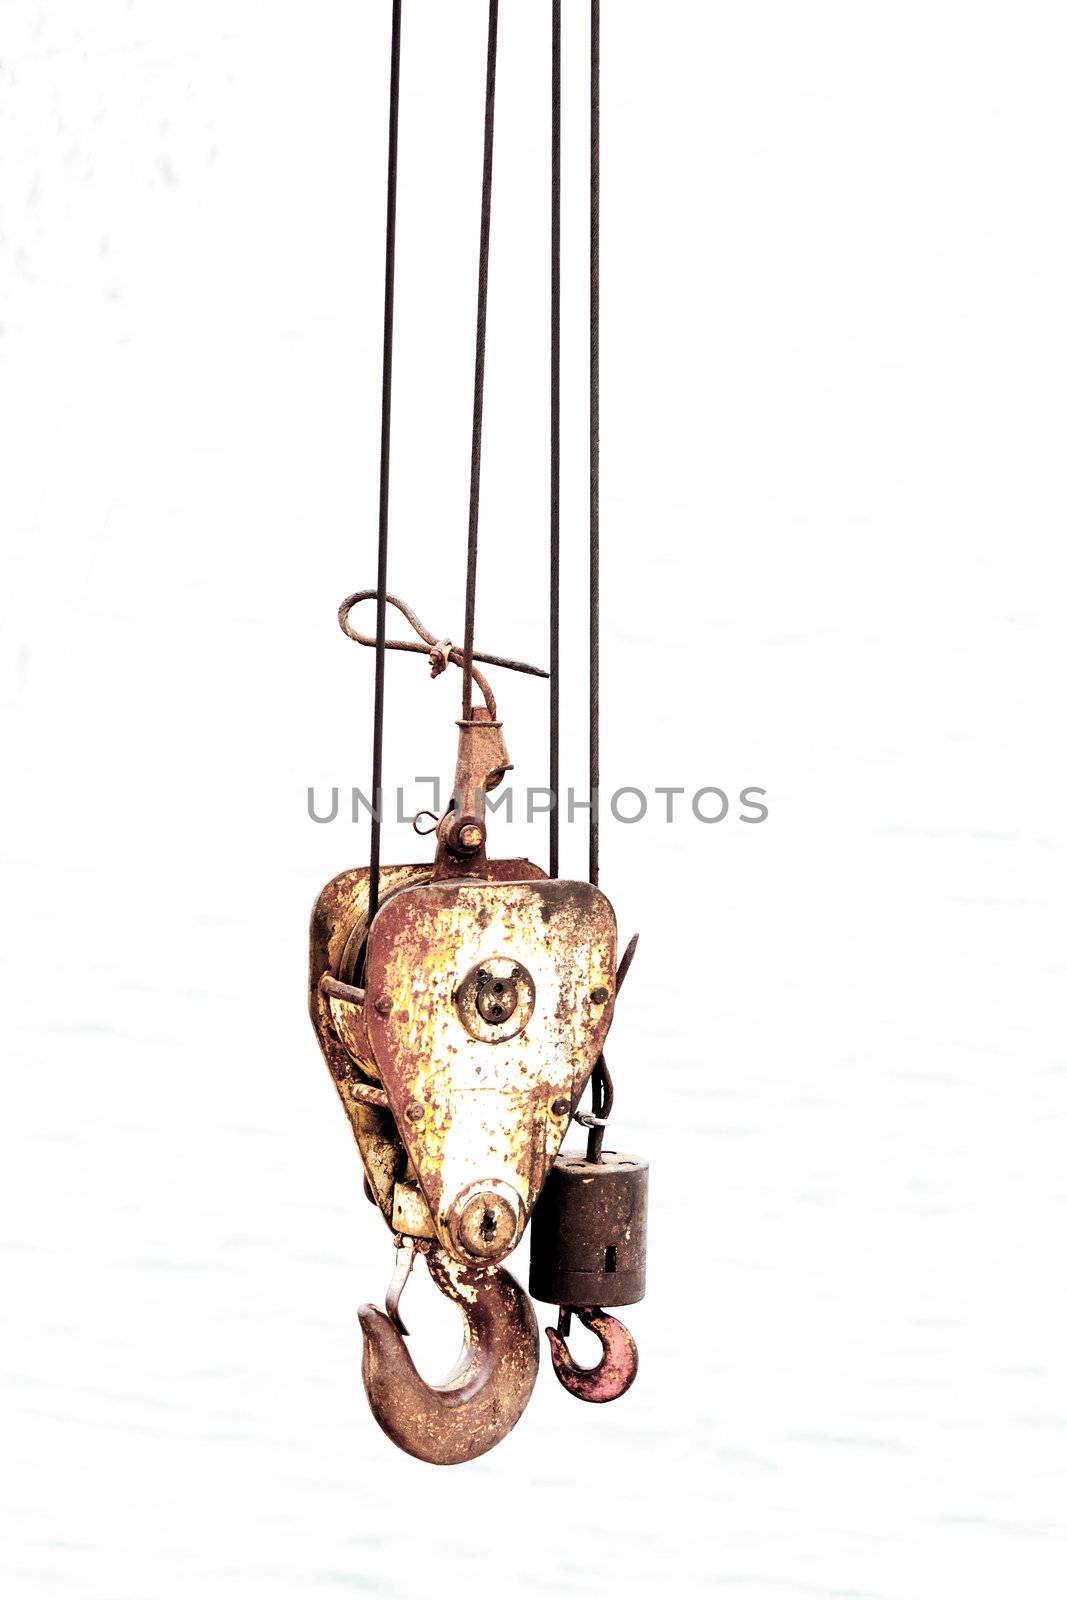 Two different sized battered and rusted hooks and cables for hoisting or lifting heavy loads isolated on white background